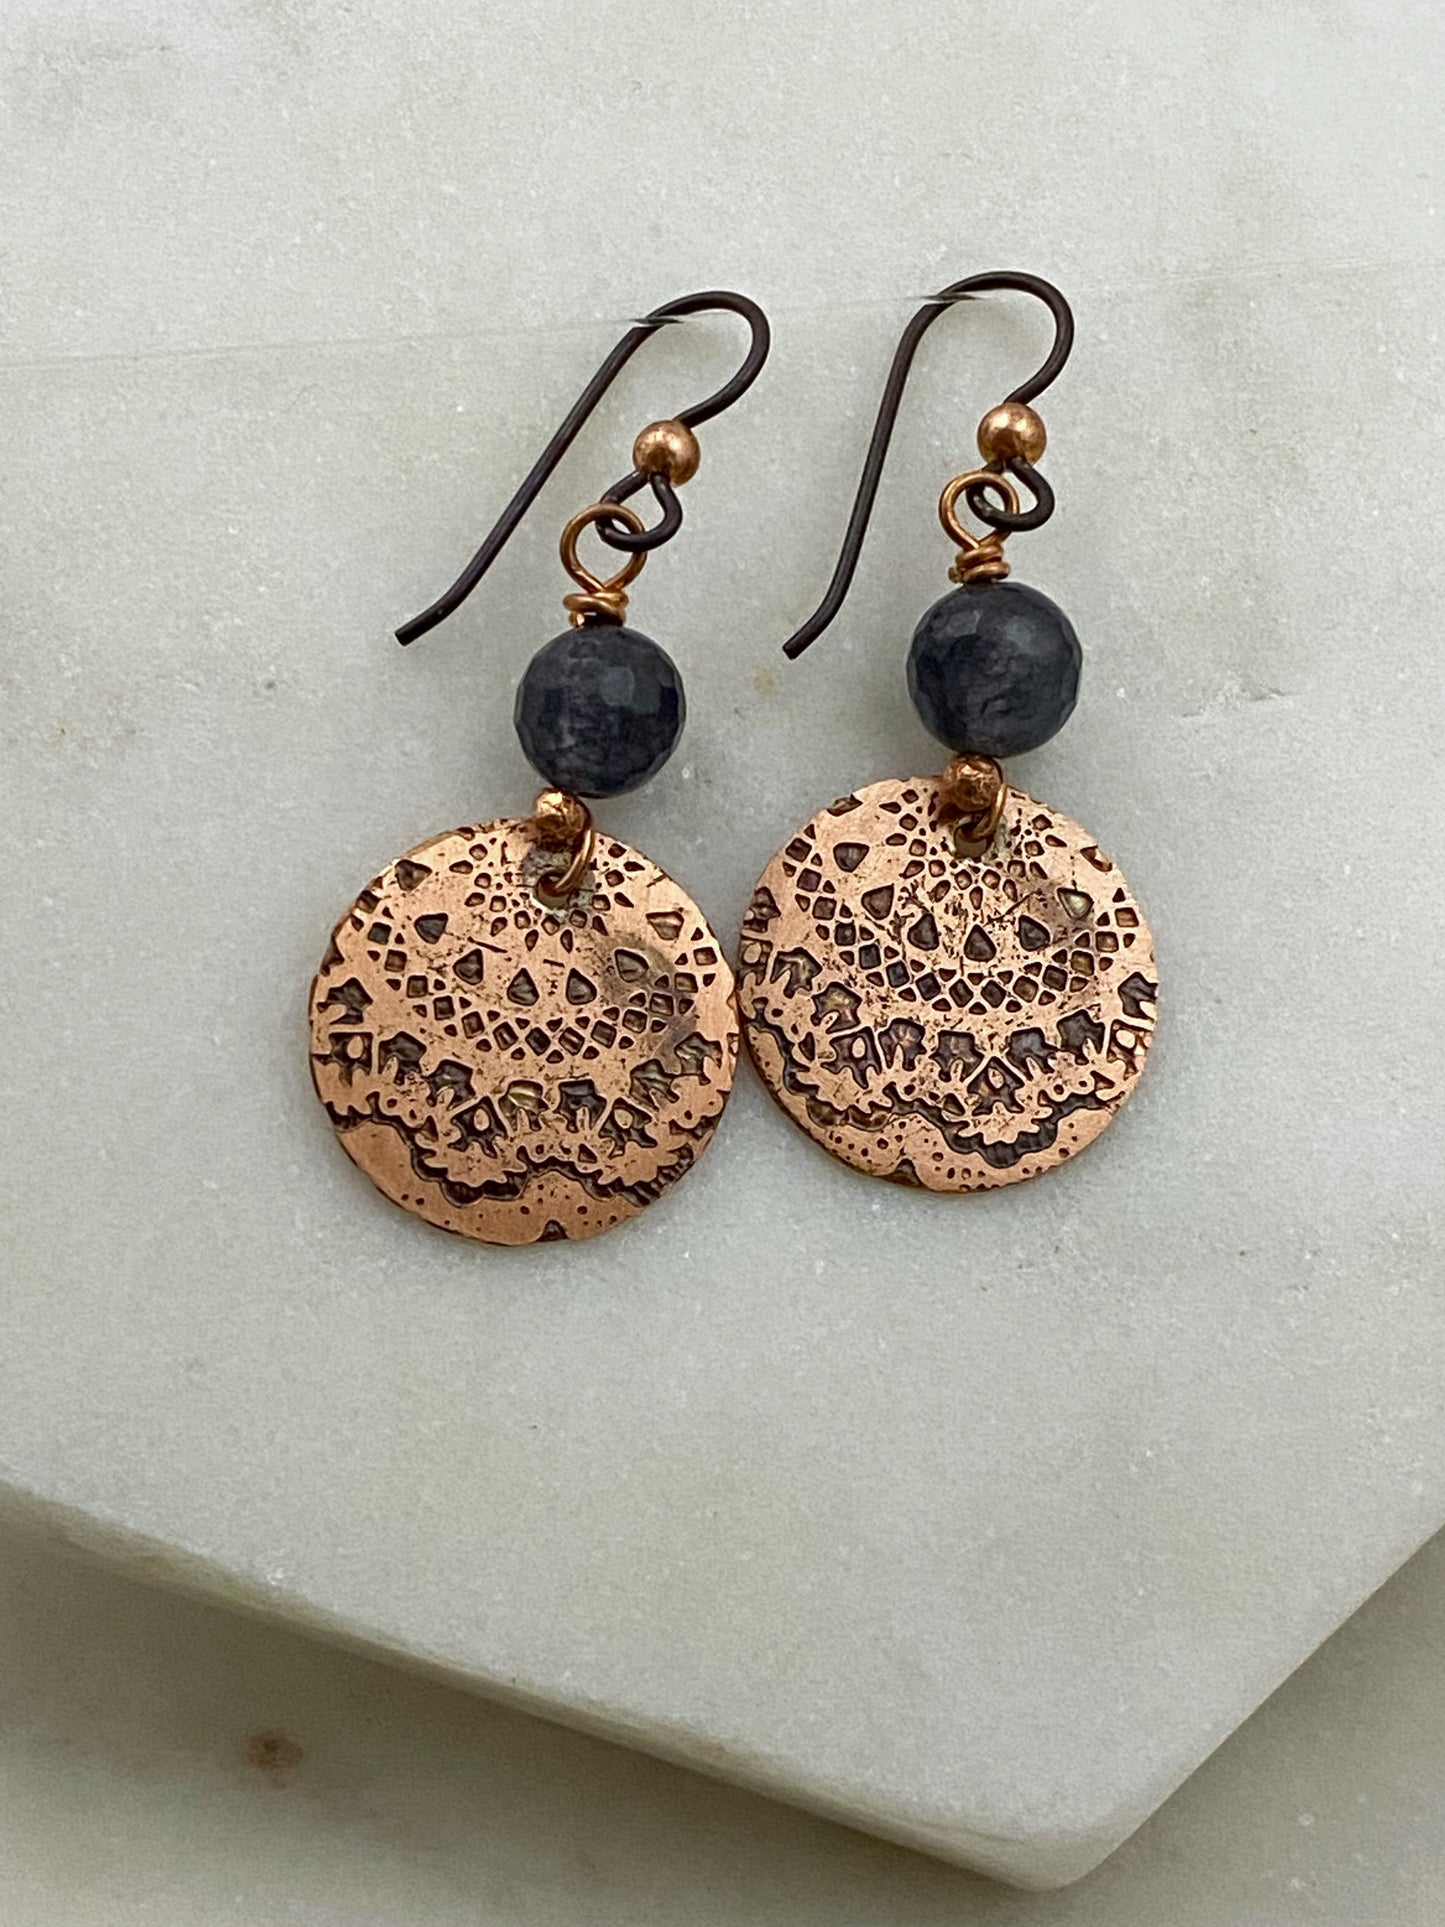 Acid etched copper earrings with quartz